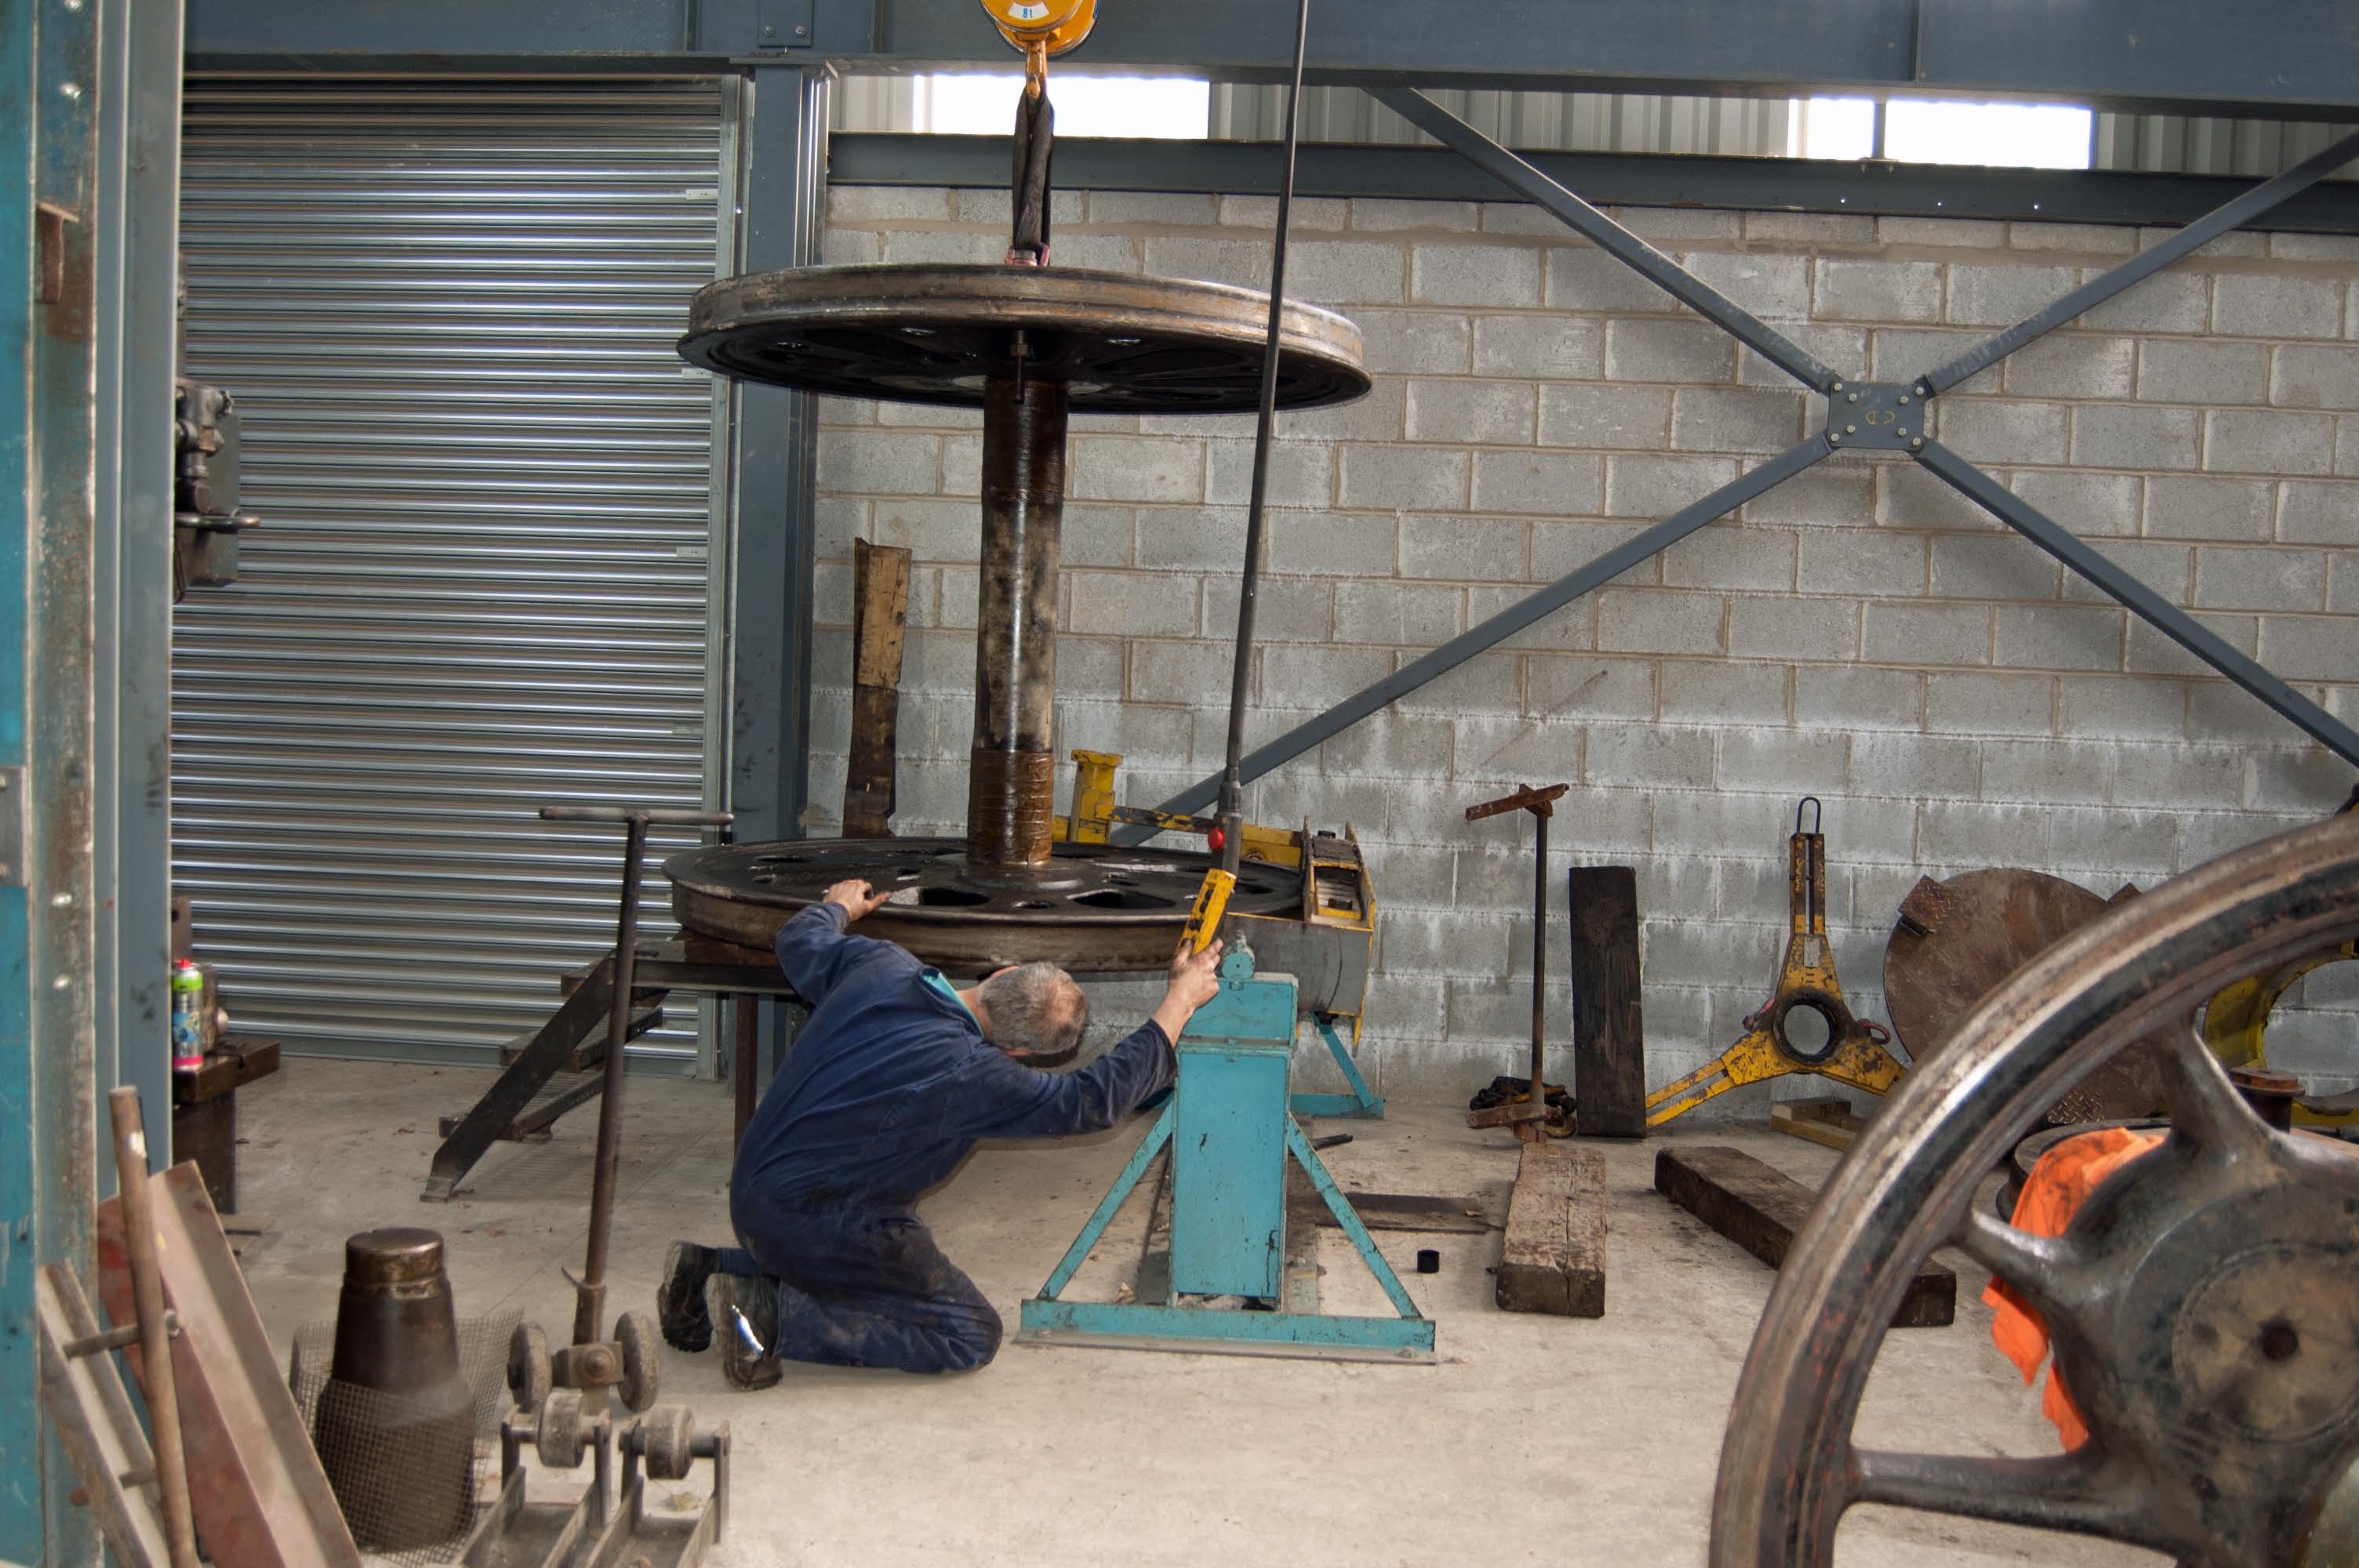 The wheelset is carefully tipped on end, before it is moved to the hearth